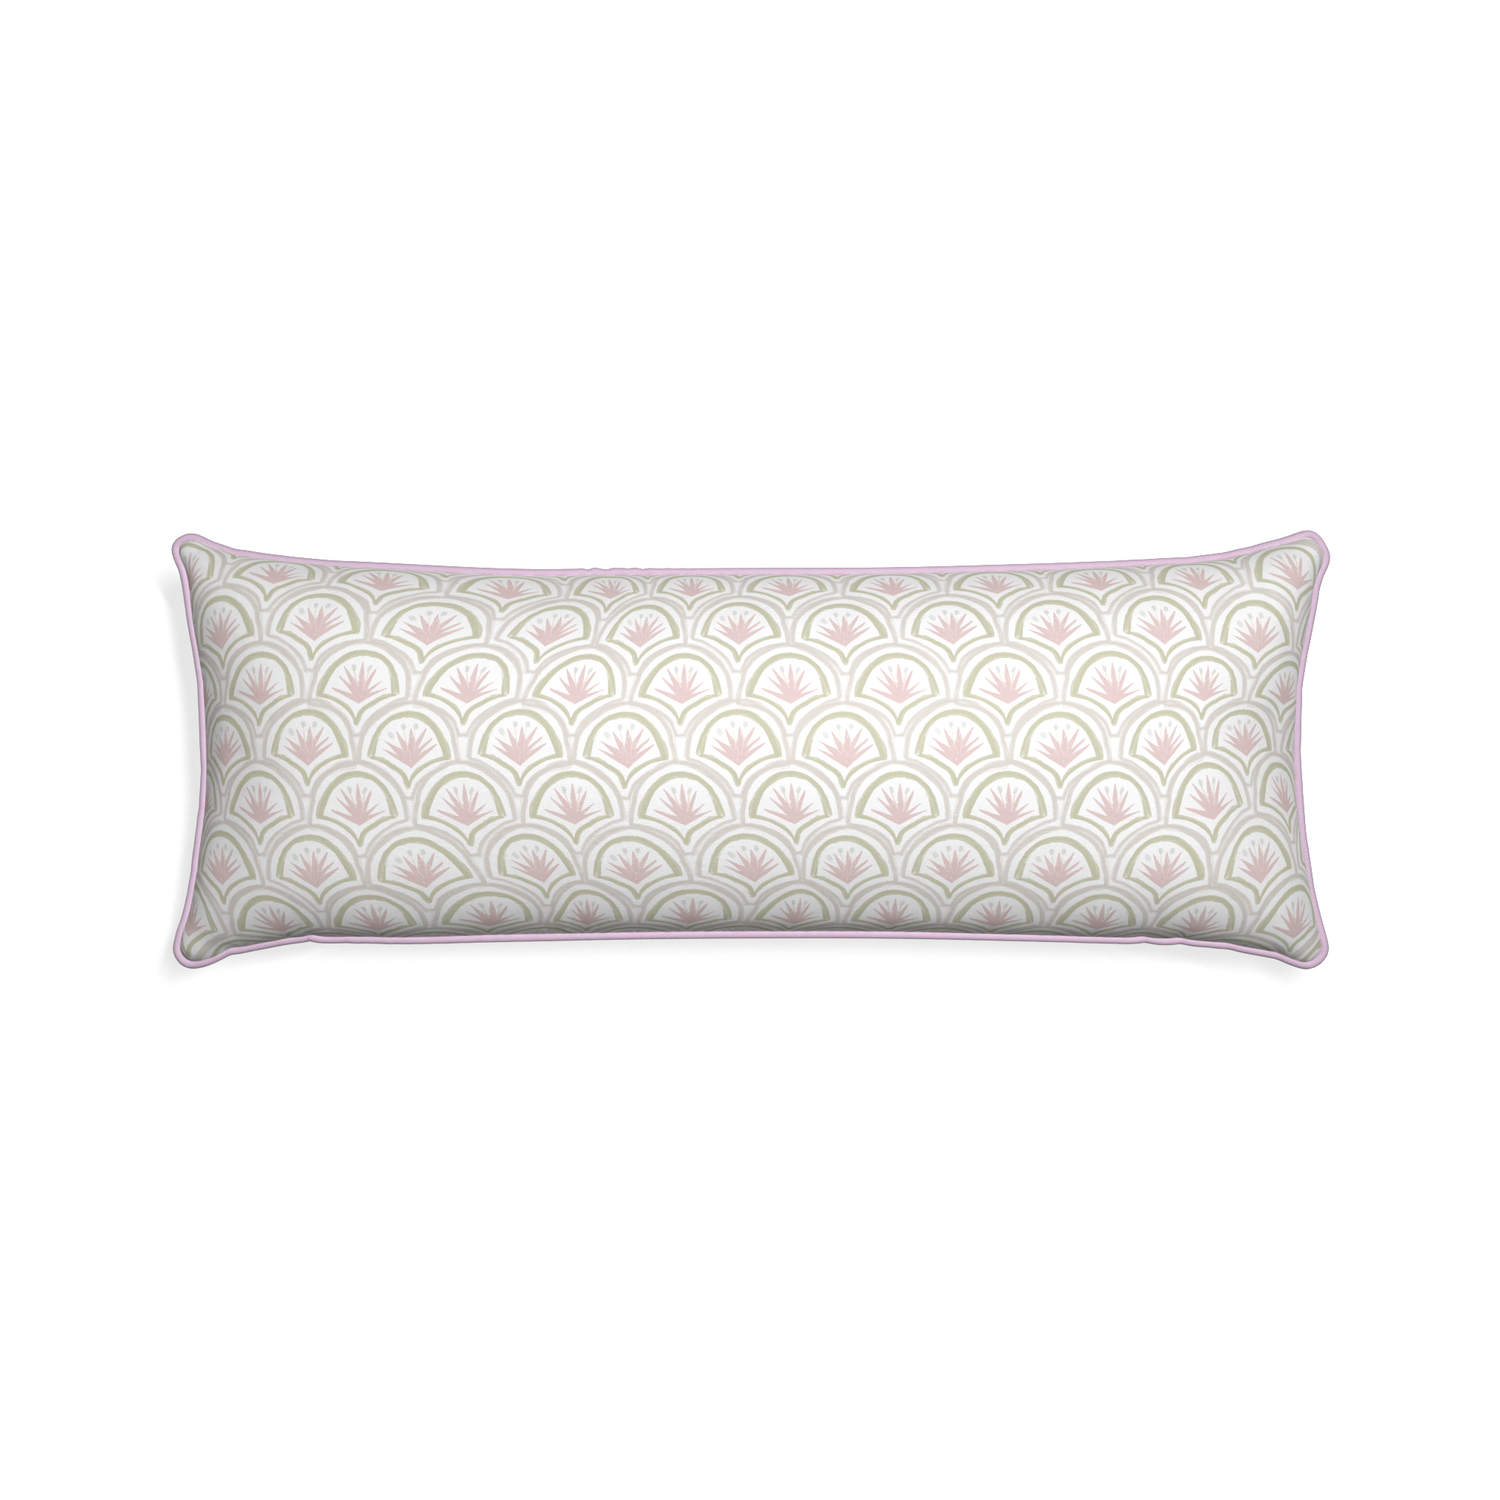 Xl-lumbar thatcher rose custom pillow with l piping on white background